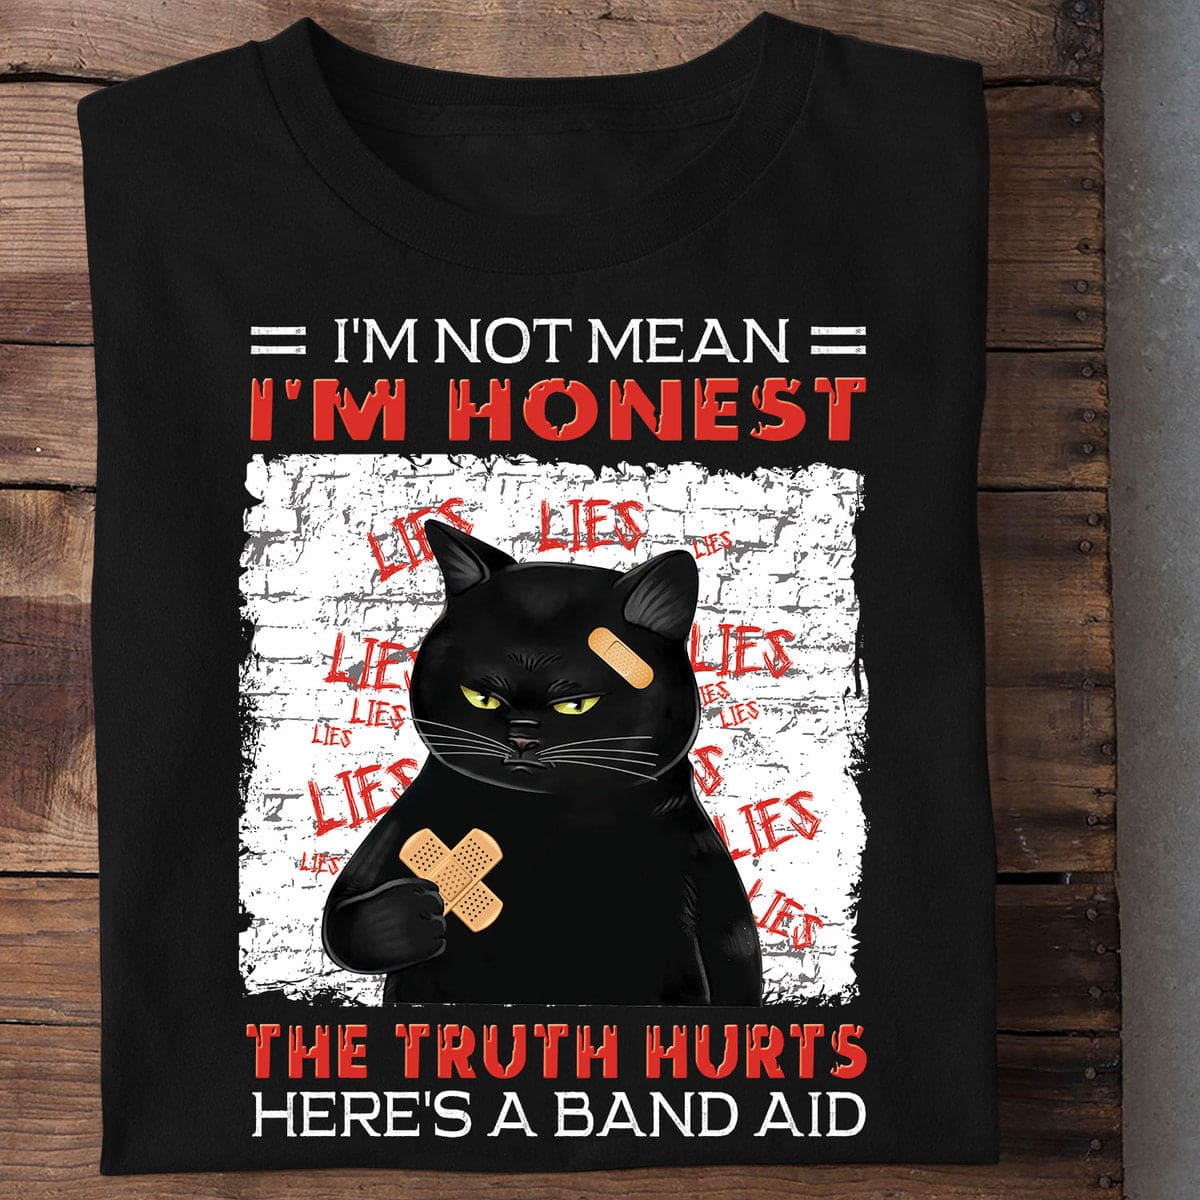 Black Cat - I'm not mean i'm honest the truth hurts here's a band aid